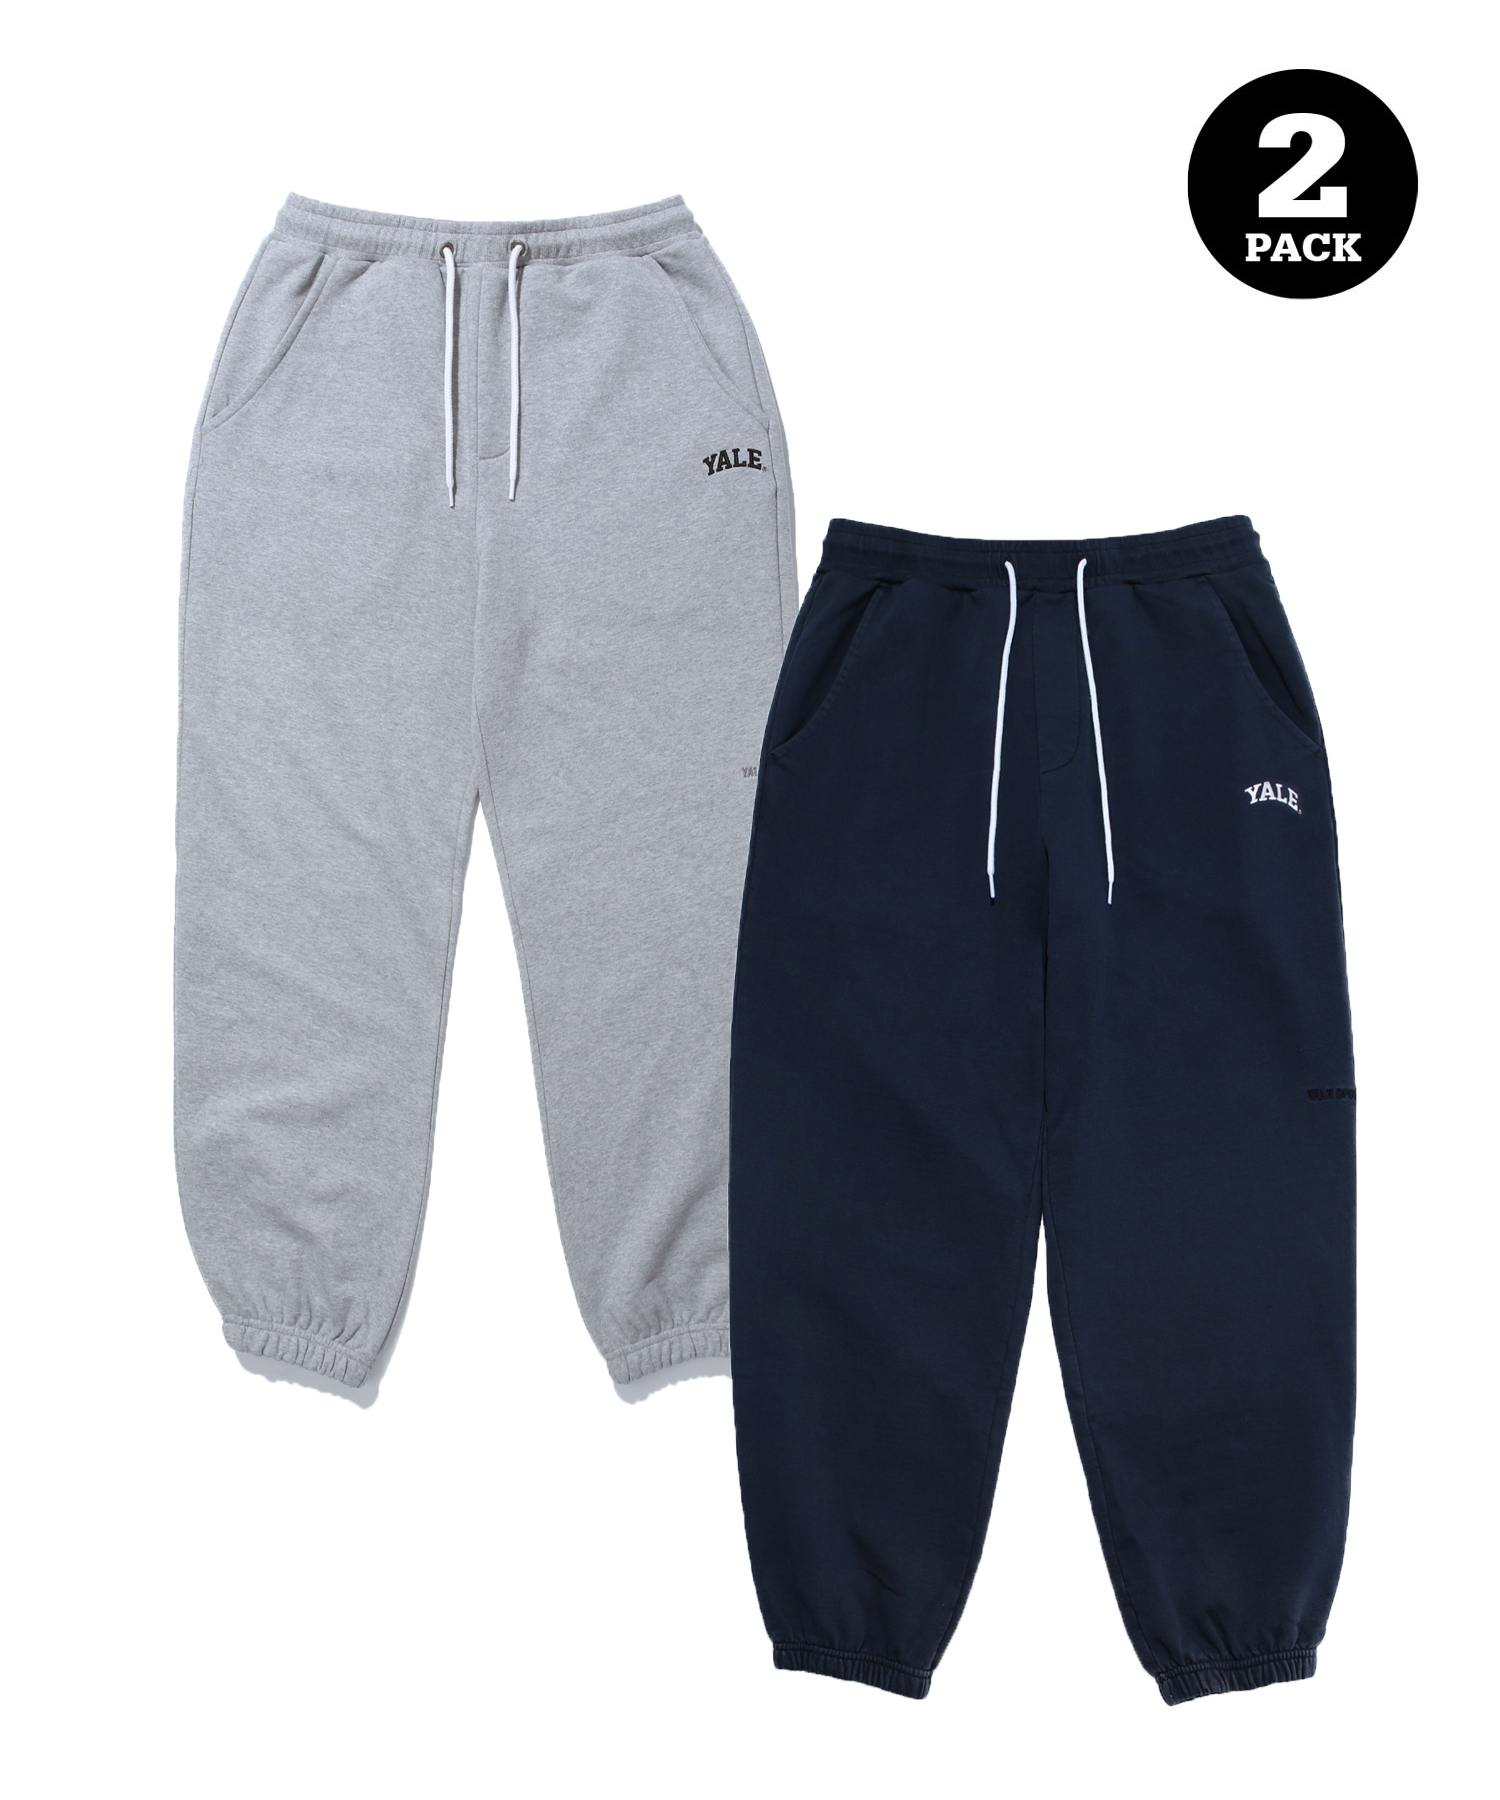 [ONEMILE WEAR] 2PACK SMALL ARCH SWEAT PANTS GRAY / NAVY